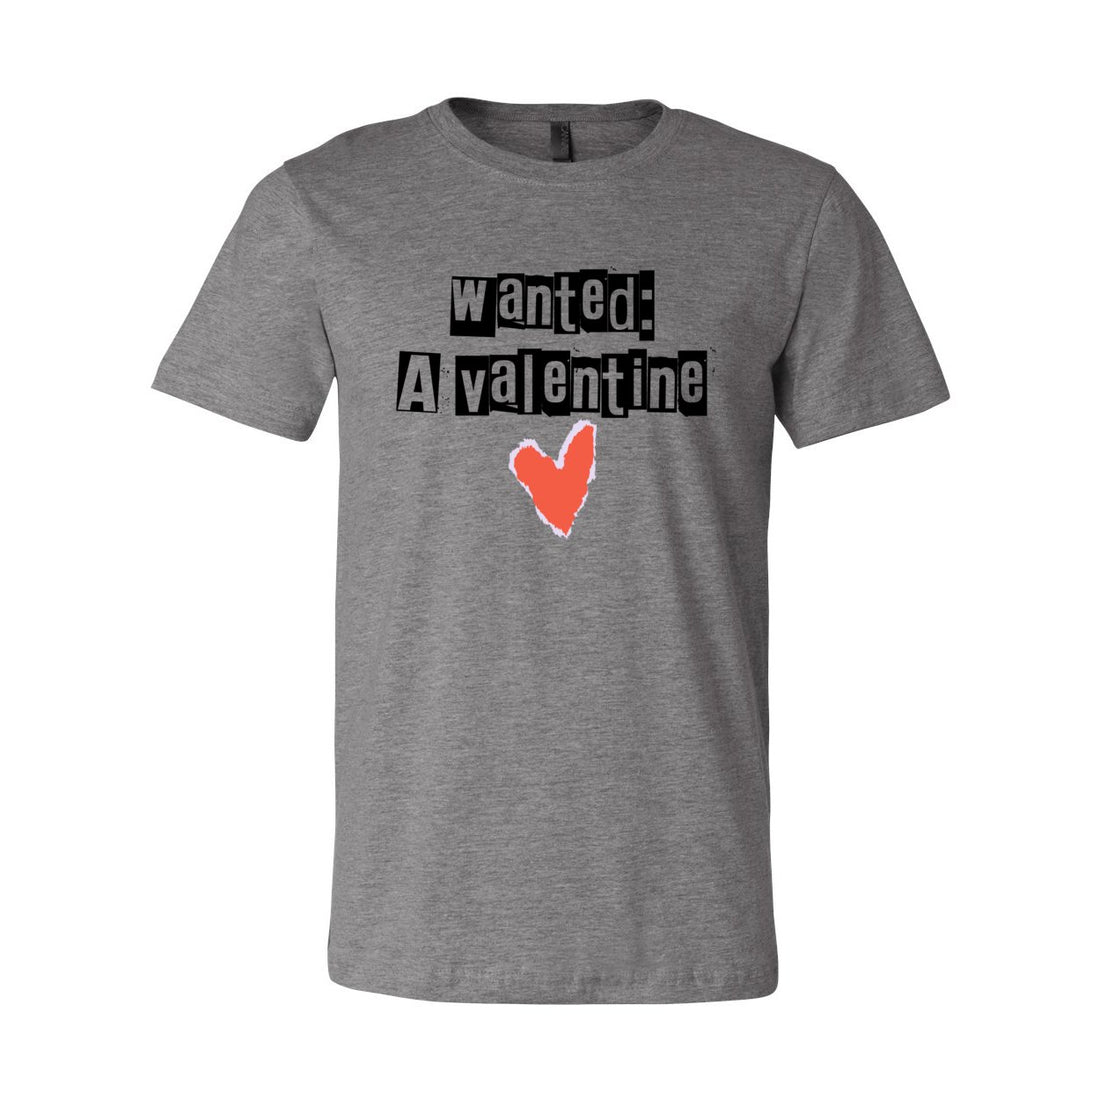 Wanted - A Valentine Sleeve Jersey Tee - T-Shirts - Positively Sassy - Wanted - A Valentine Sleeve Jersey Tee